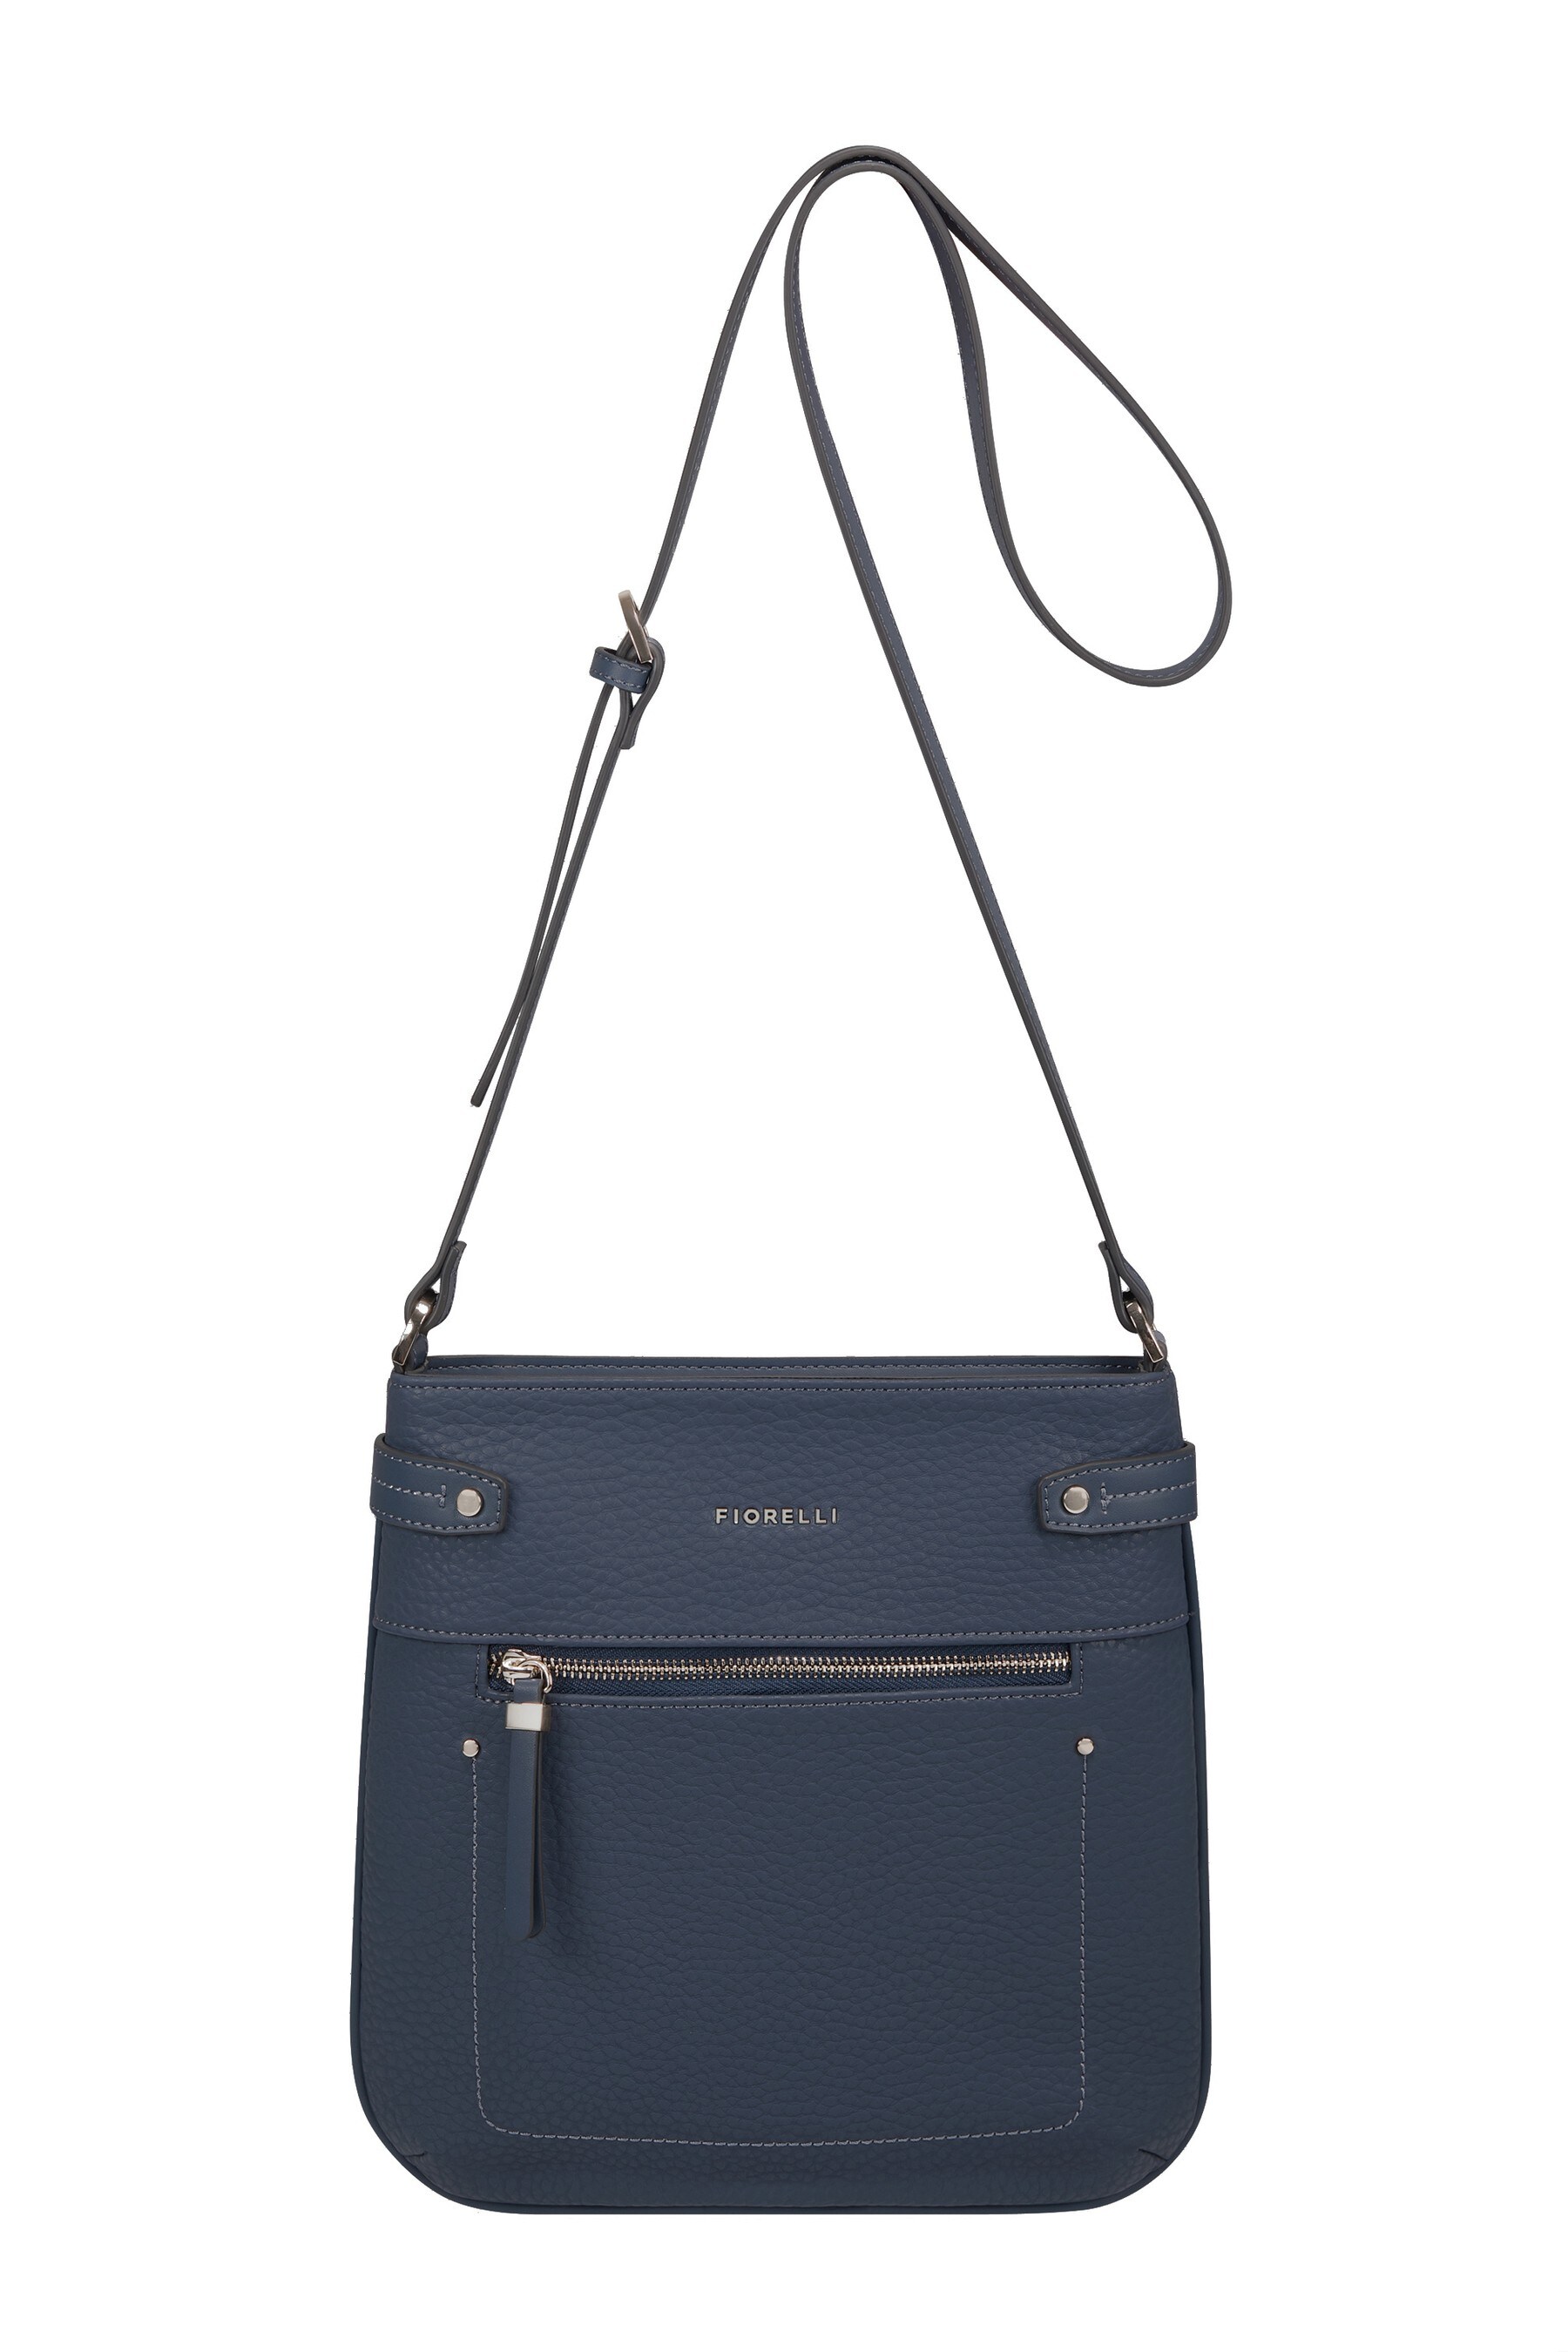 Buy Fiorelli Anna Blue Cross-Body Bag from the Next UK online shop